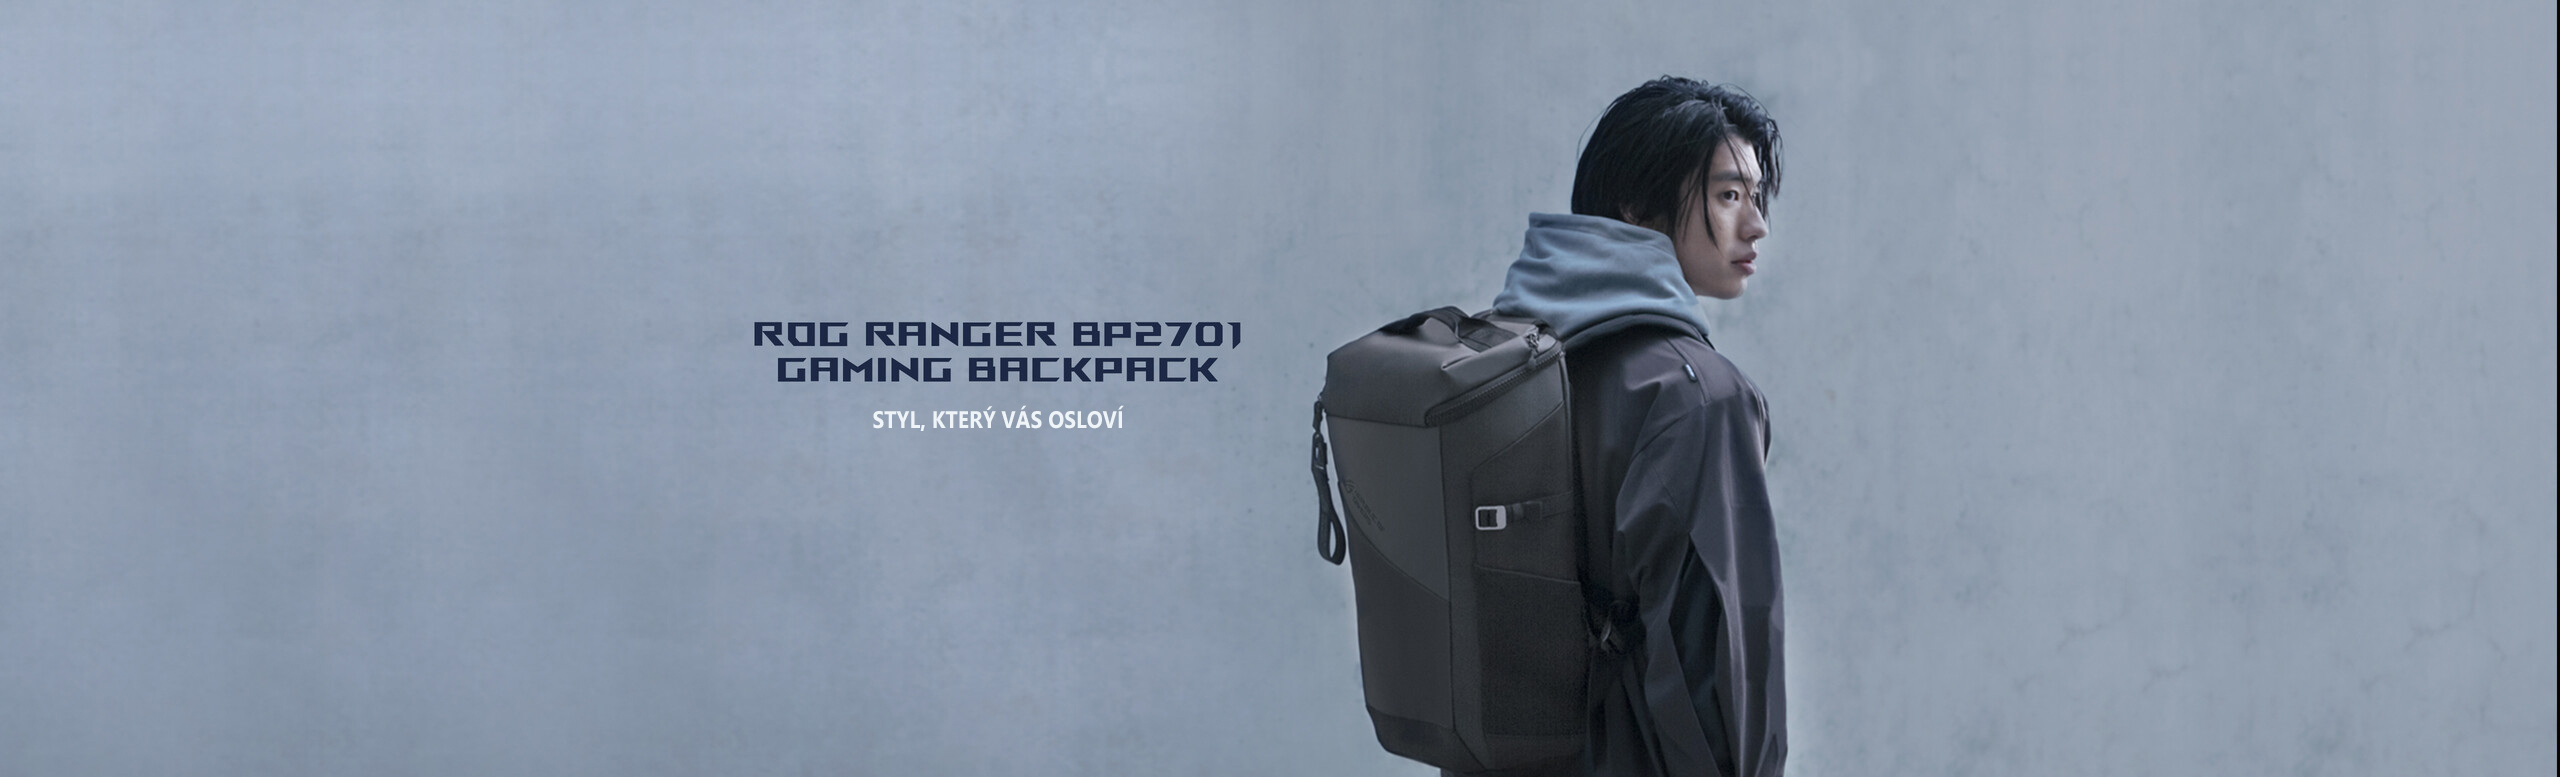 A person with a dark jacket standing near a concrete wall, looking over his shoulder and wearing an ROG Ranger BP2701 Gaming Backpack.